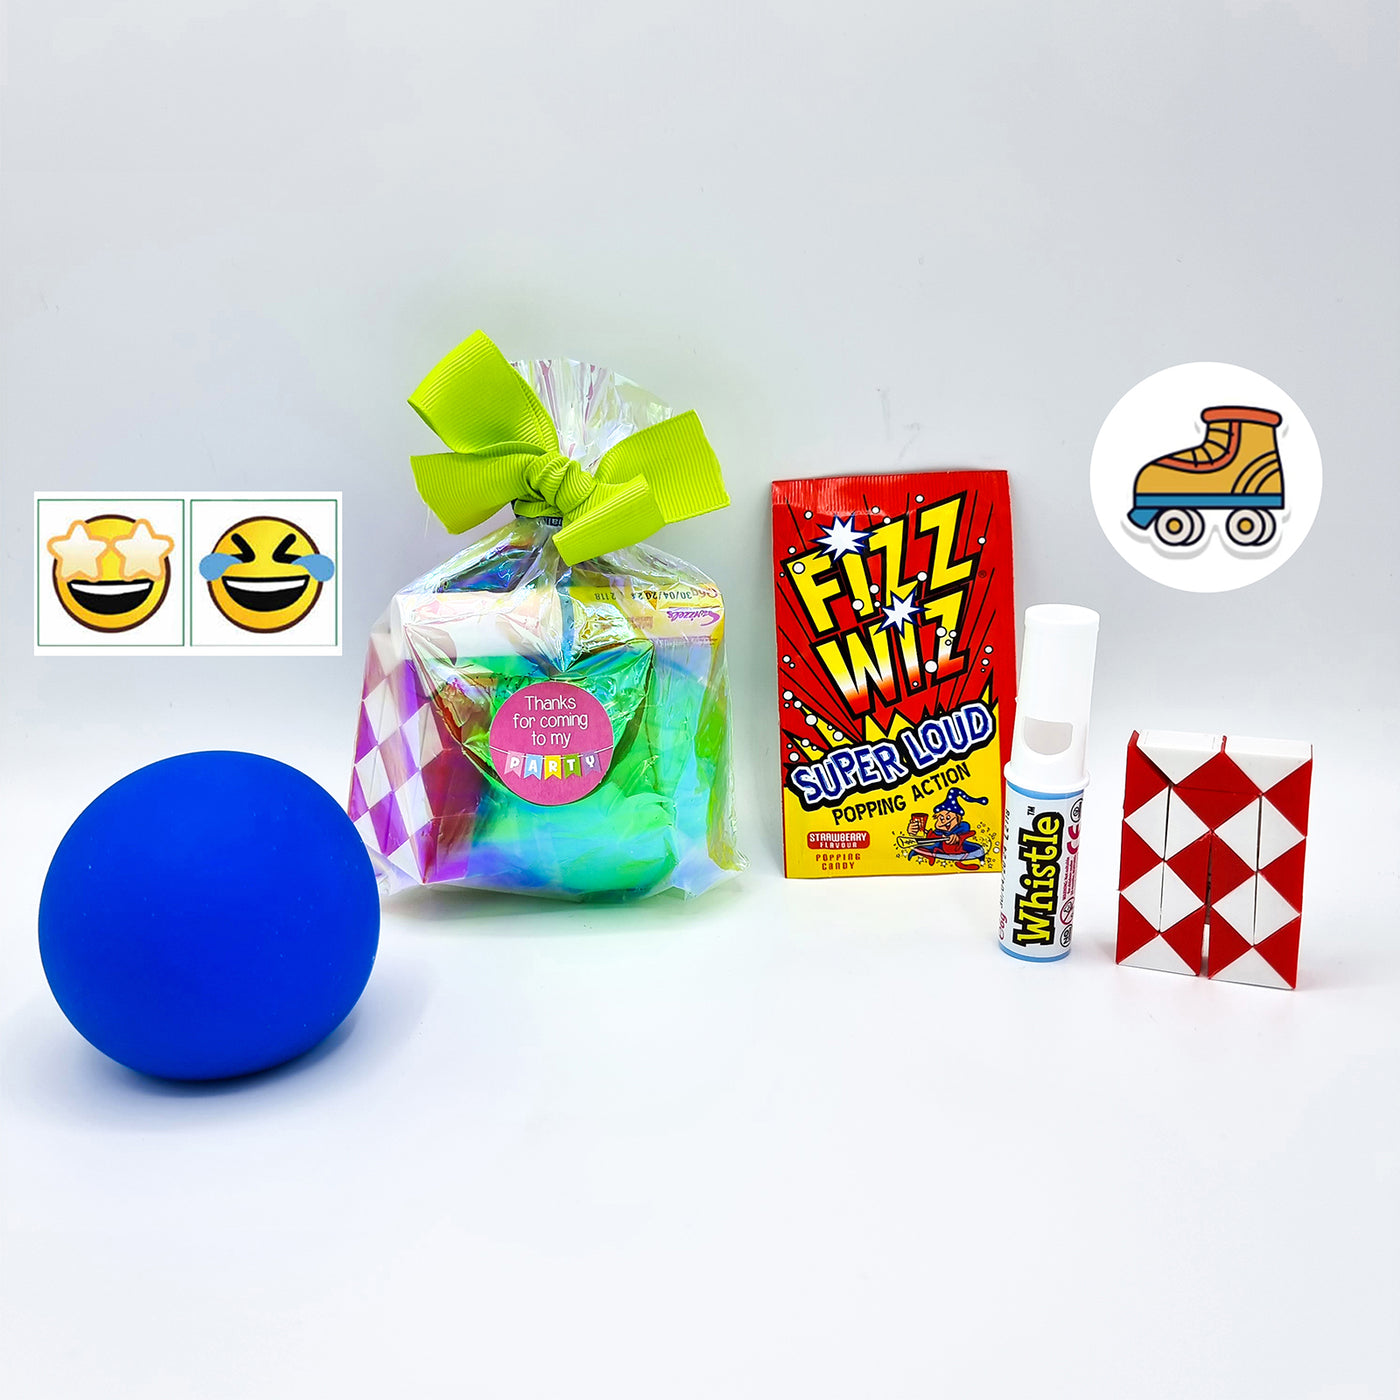 Pre Filled Children Unisex Vegetarian Birthday Party Goody Bags With Toys And Sweets, Party Favours.